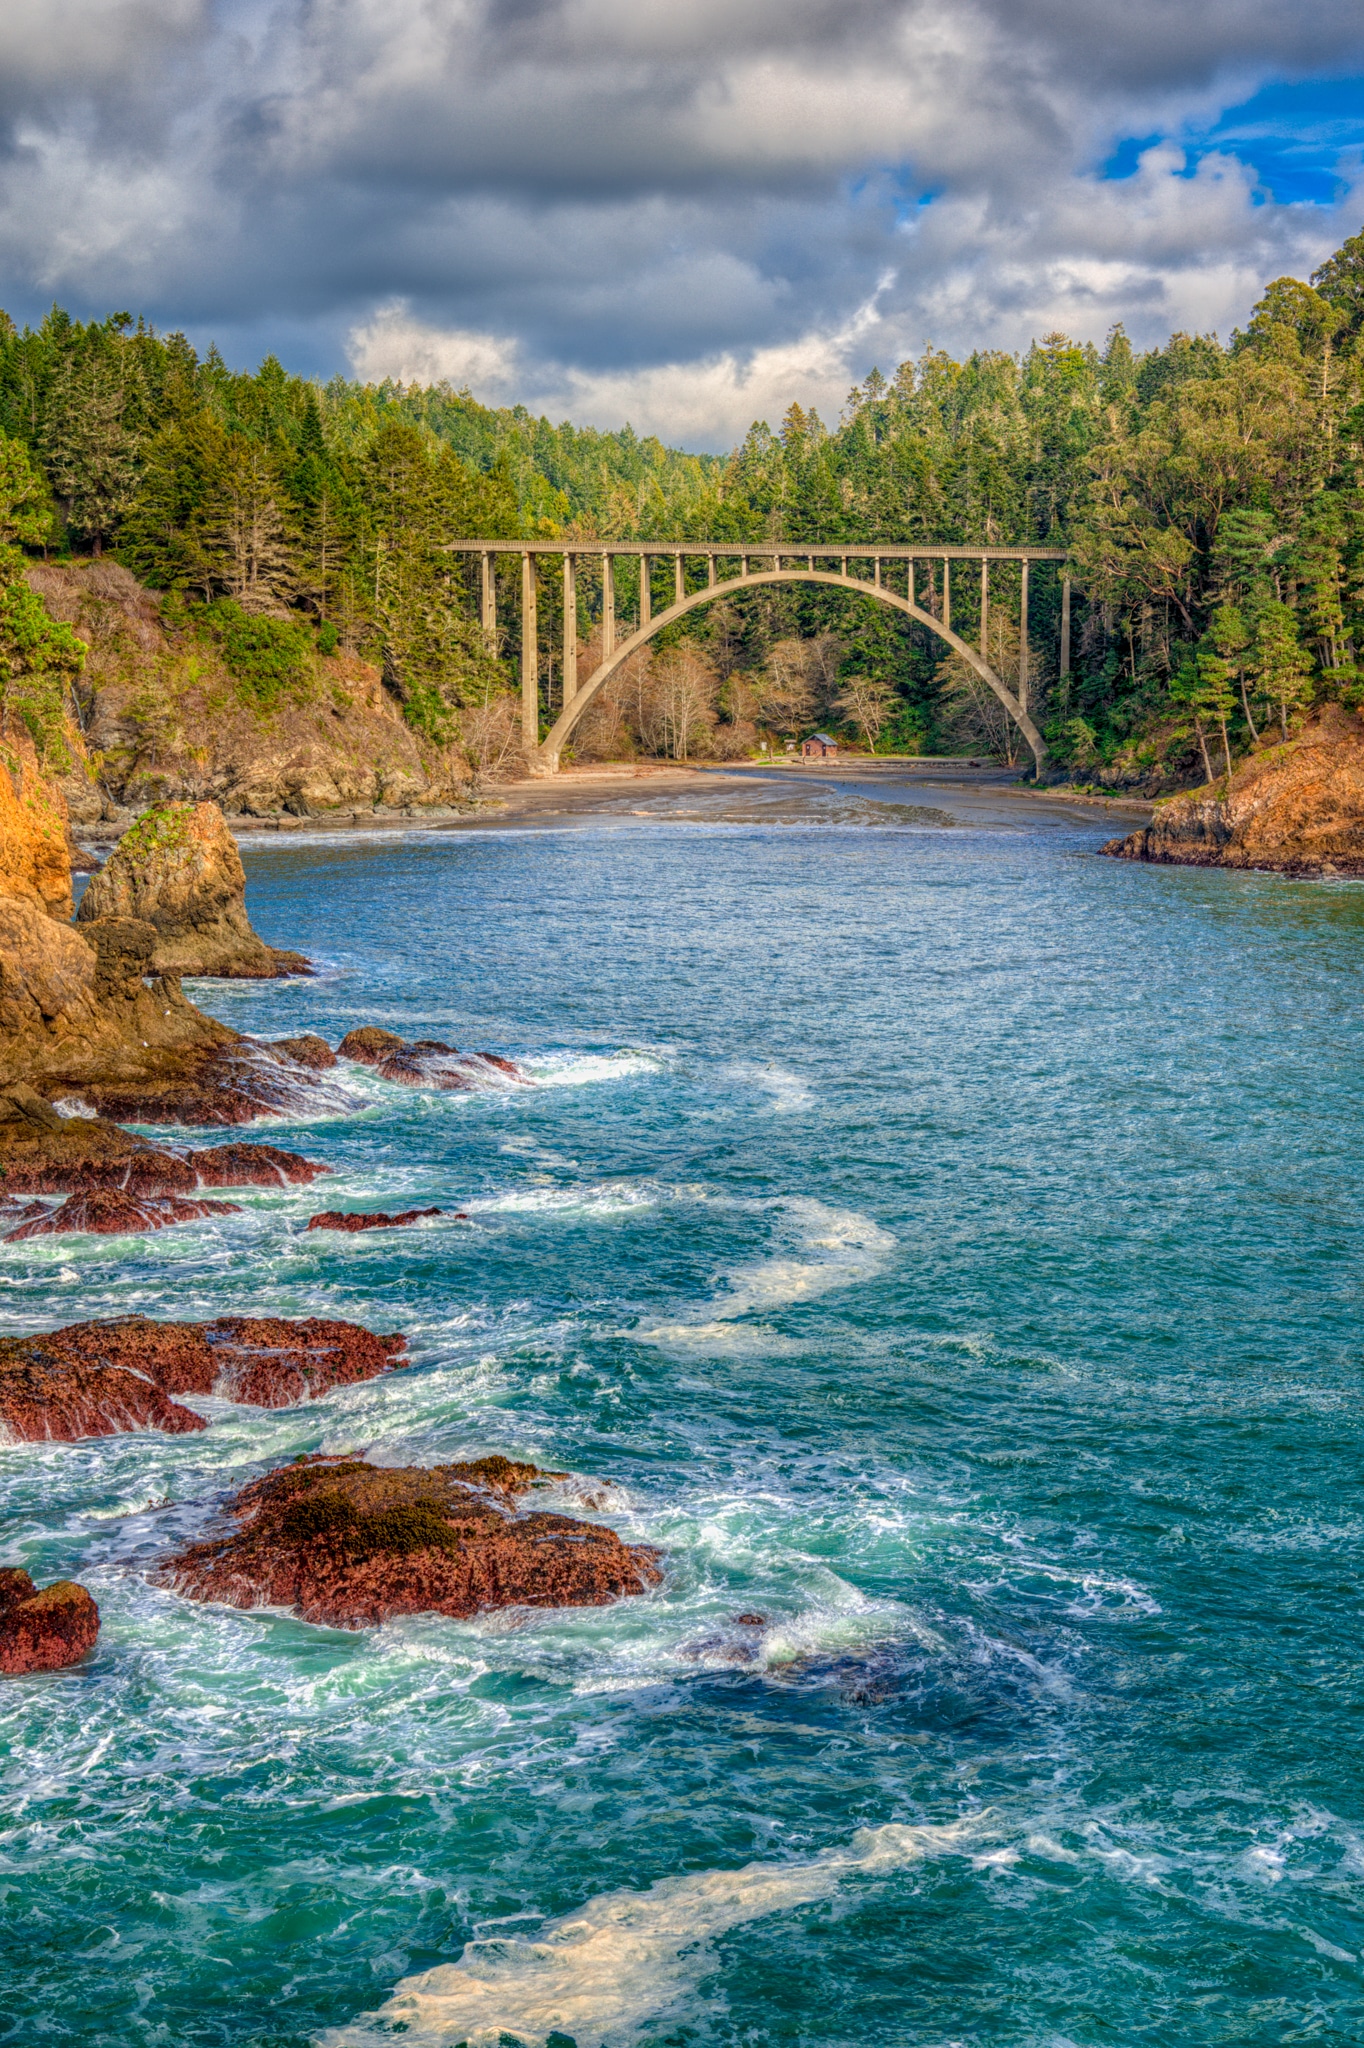 The graceful arch of the Russian Gulch Bridge, also known as the Frederick W. Panhorst Bridge, spans the Russian Gulch Creek in Russian Gulch State Park, Mendocino County, California.